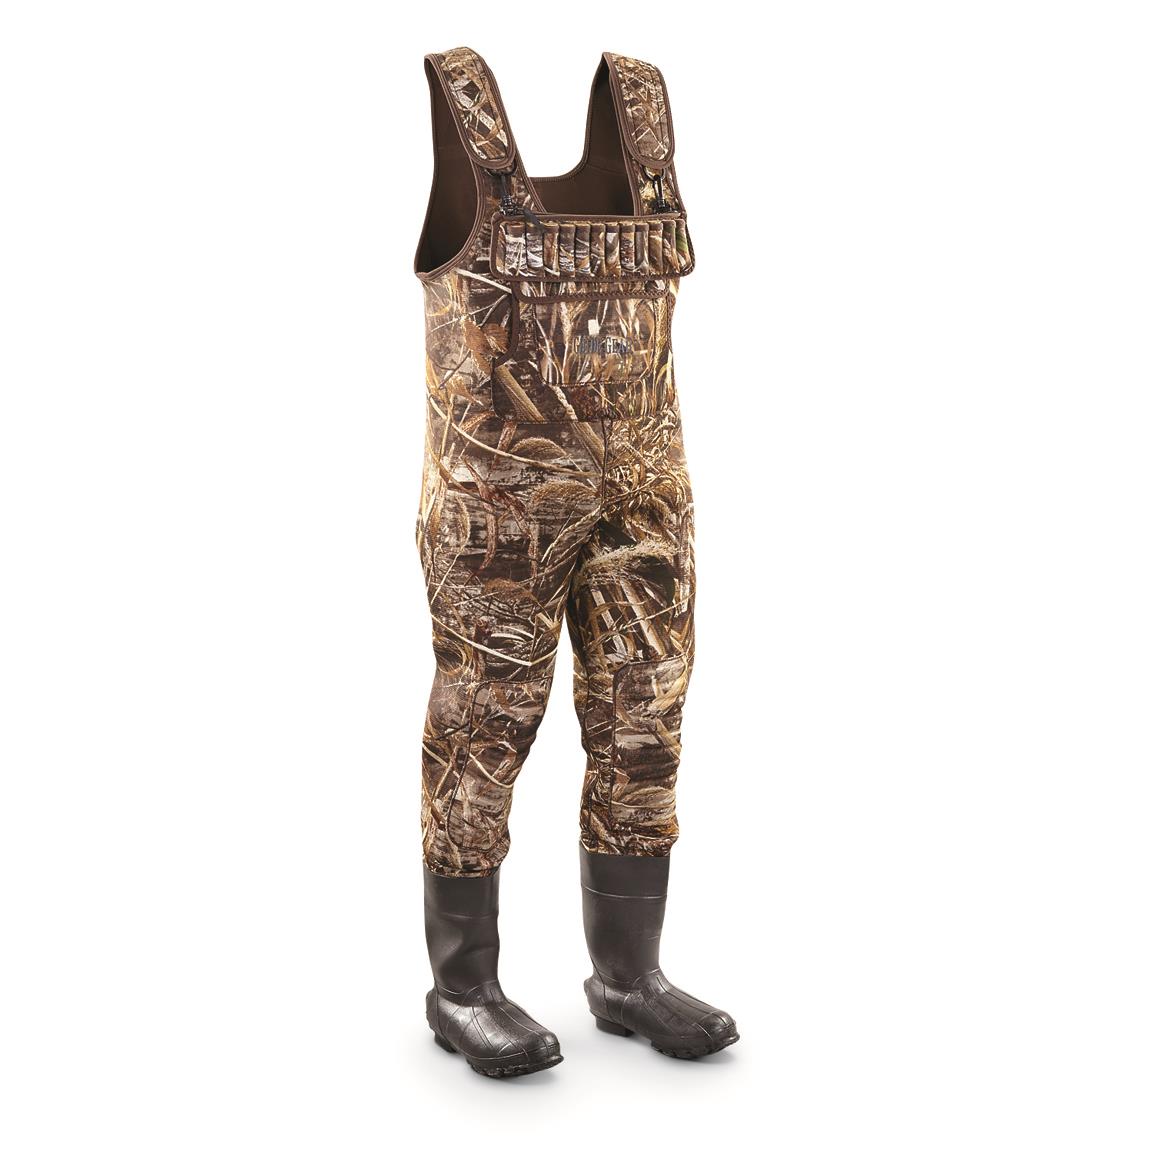 Guide Gear Men's Extreme 2,000-gram Insulated Chest Waders, Realtree MAX-5®